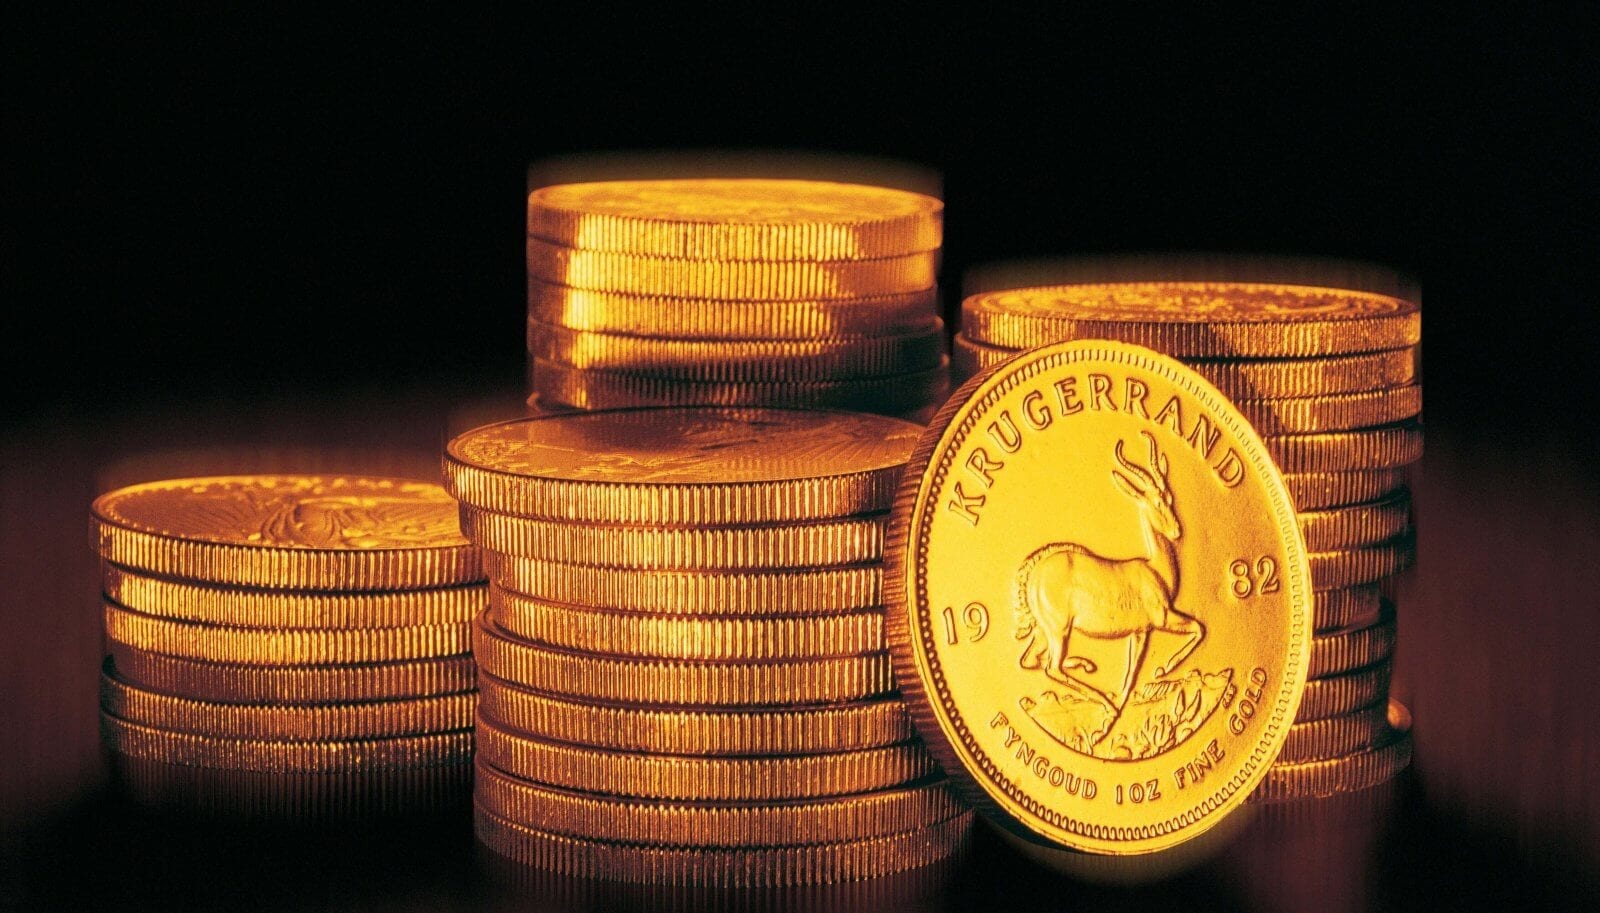 Gold investment coins include foreign coins such as the Krugerrand